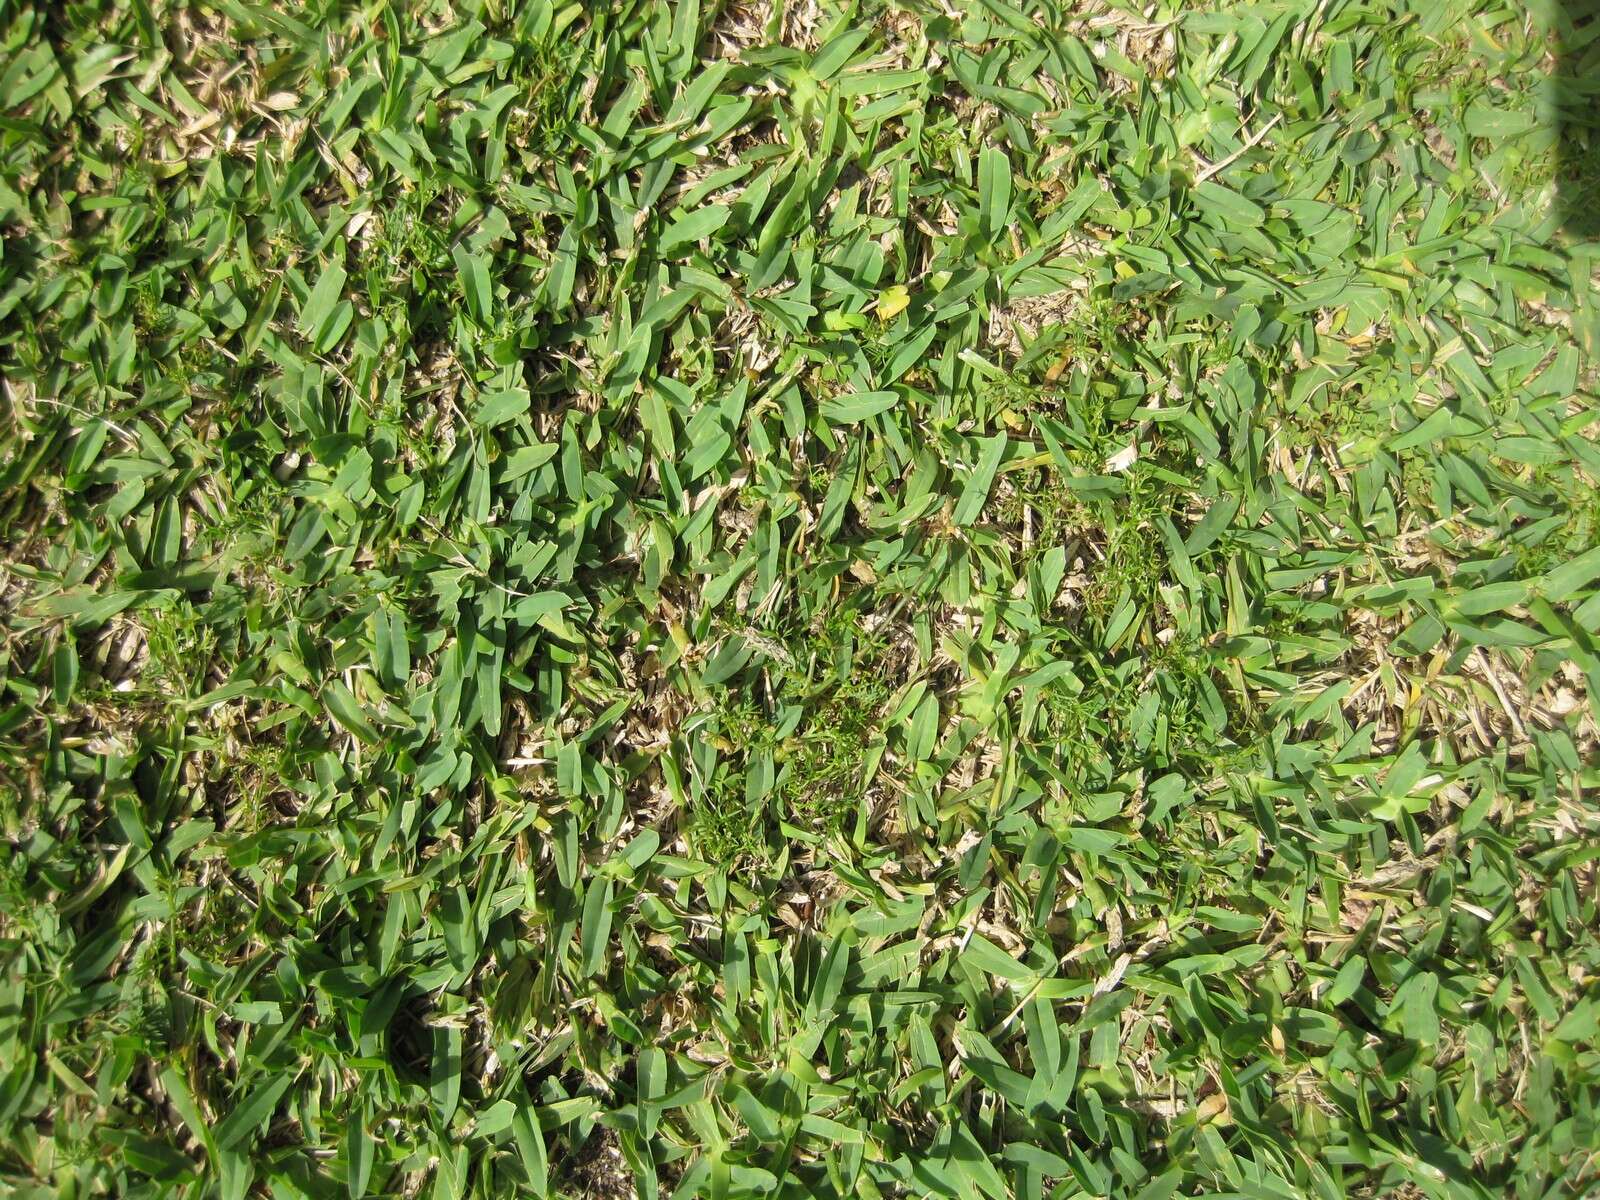 Image of St. Augustine grass